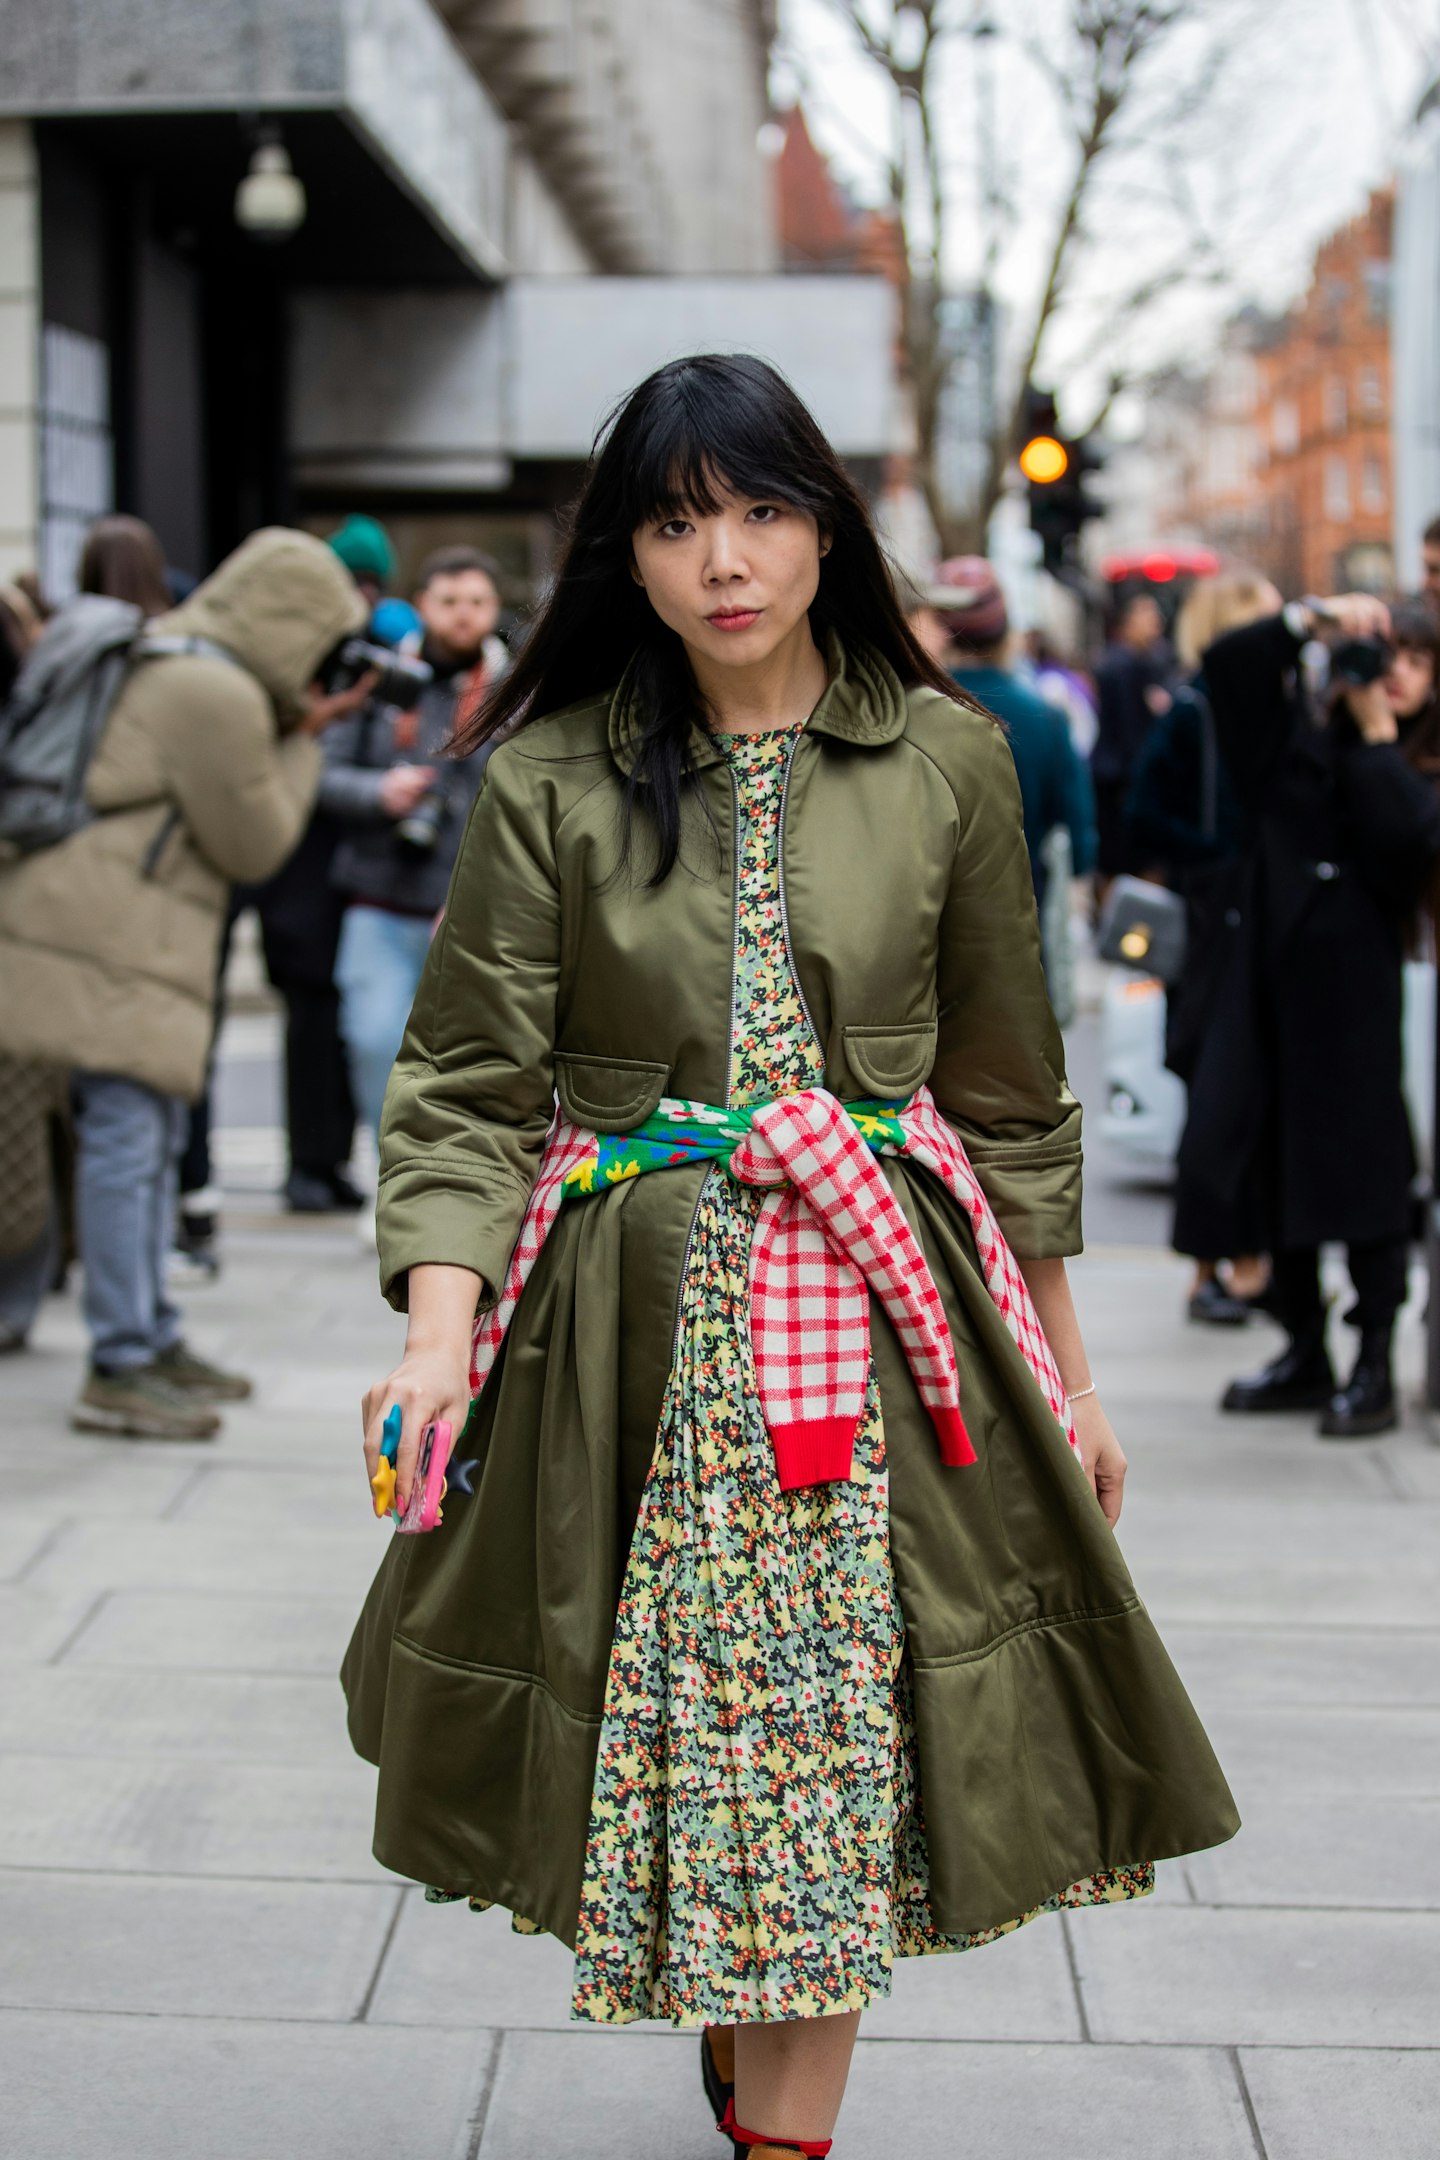 Susie Lau cinched her khaki coat with a playfully printed jumper